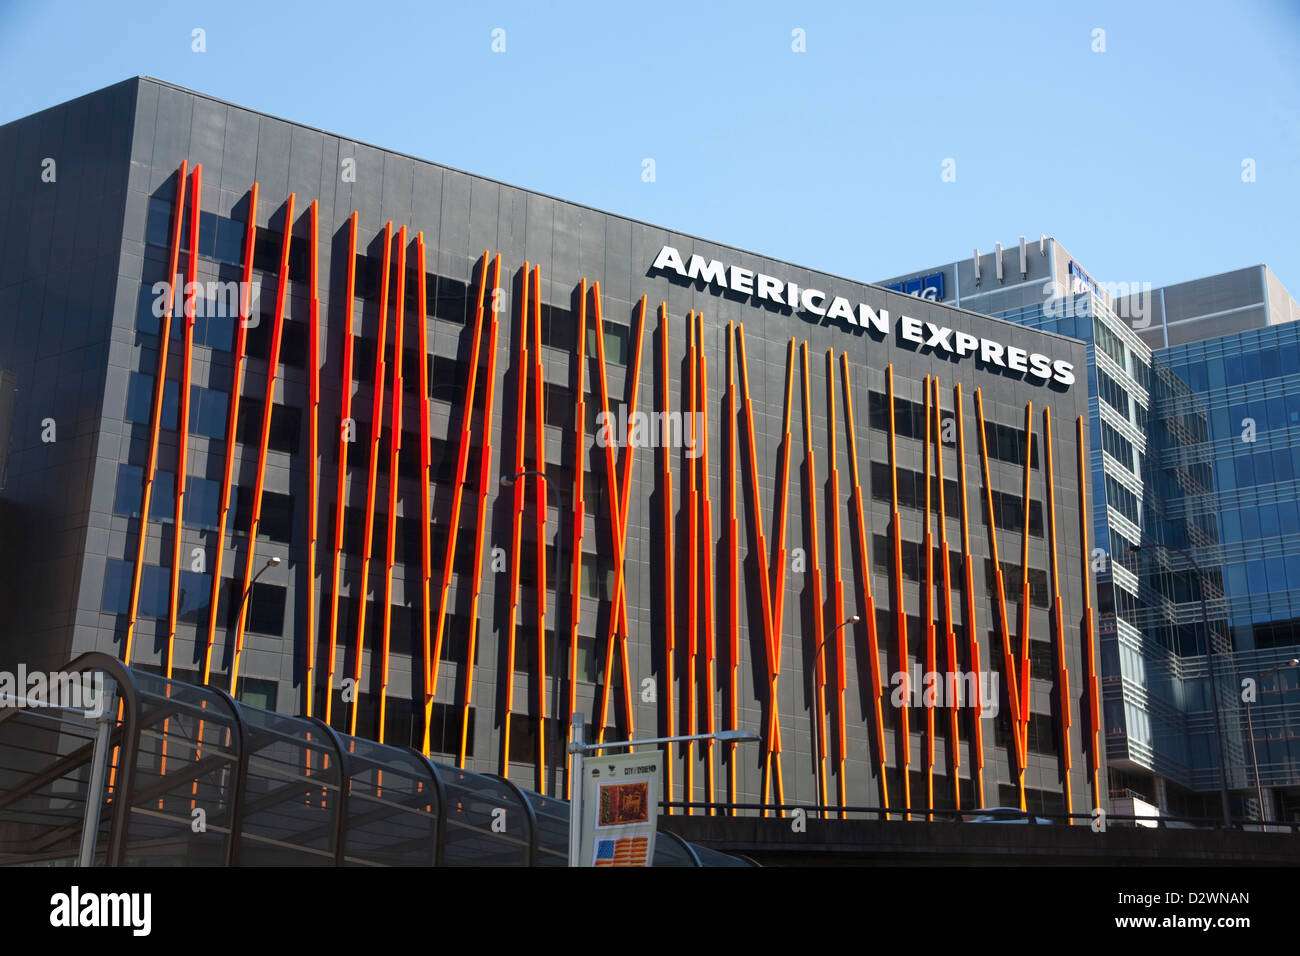 American Express House is located at 12 Shelley Street and situated on